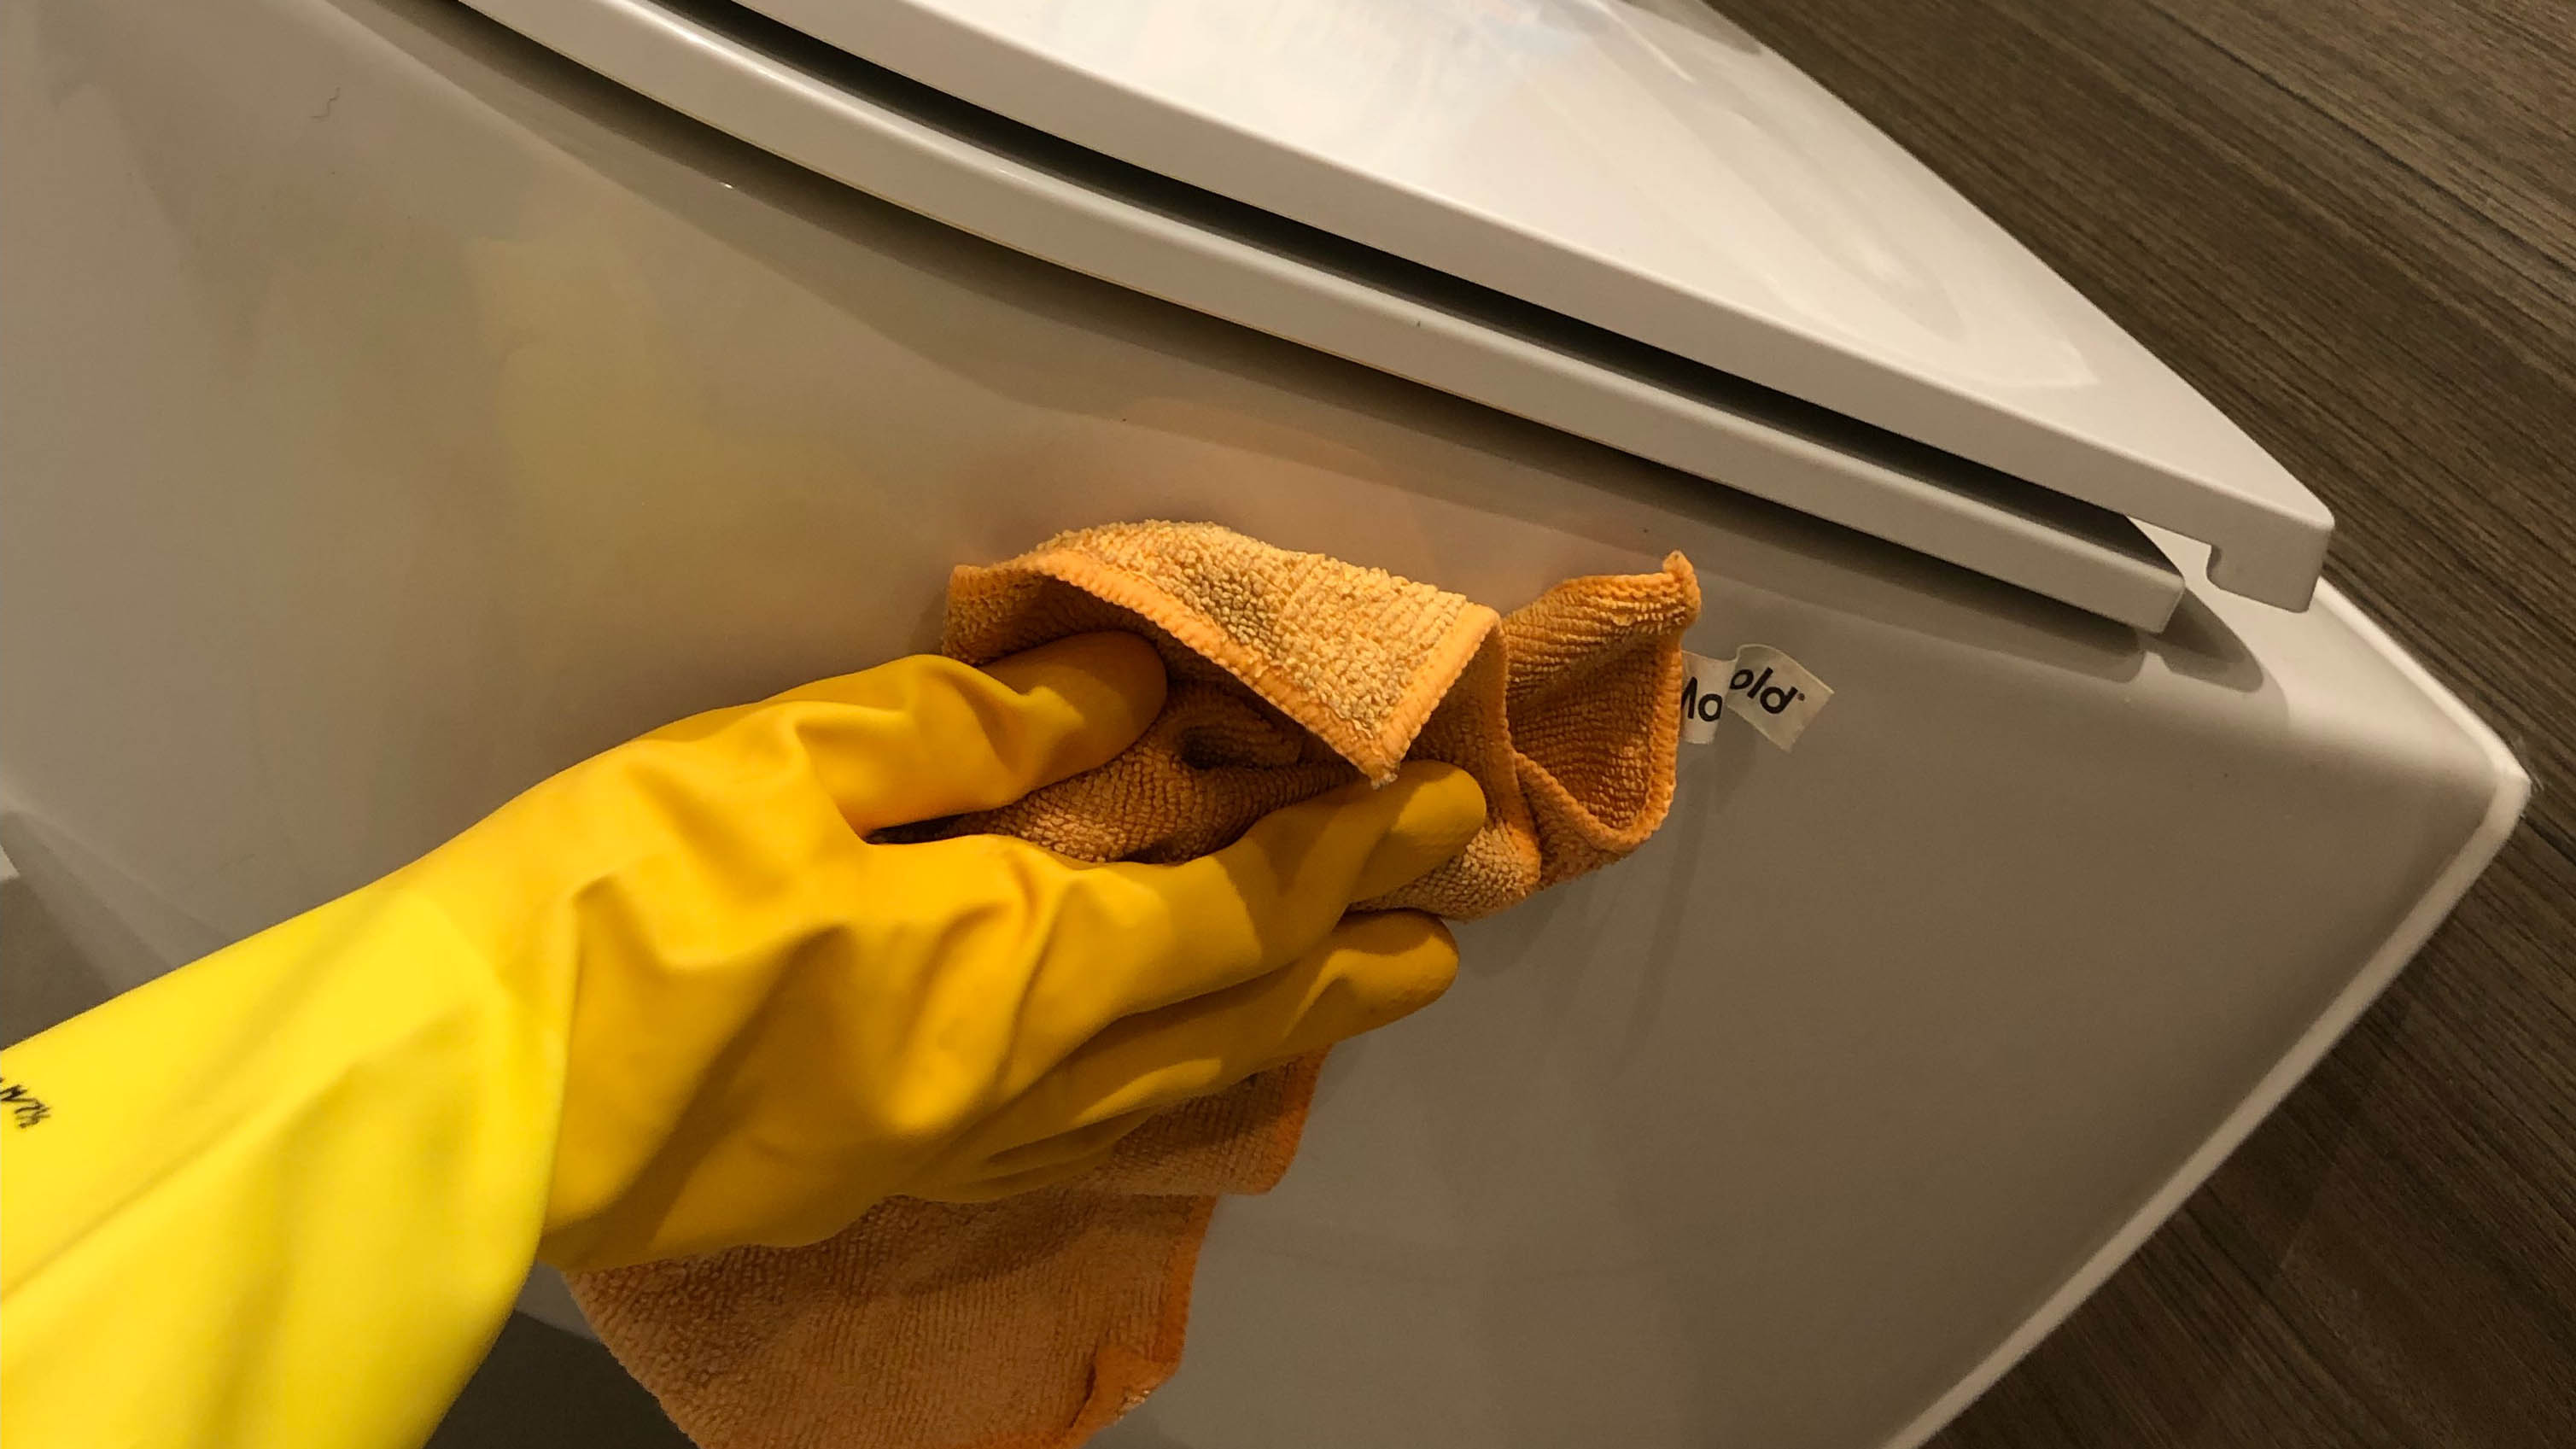 Microfiber cloth used to clean toilet rim while wearing rubber gloves